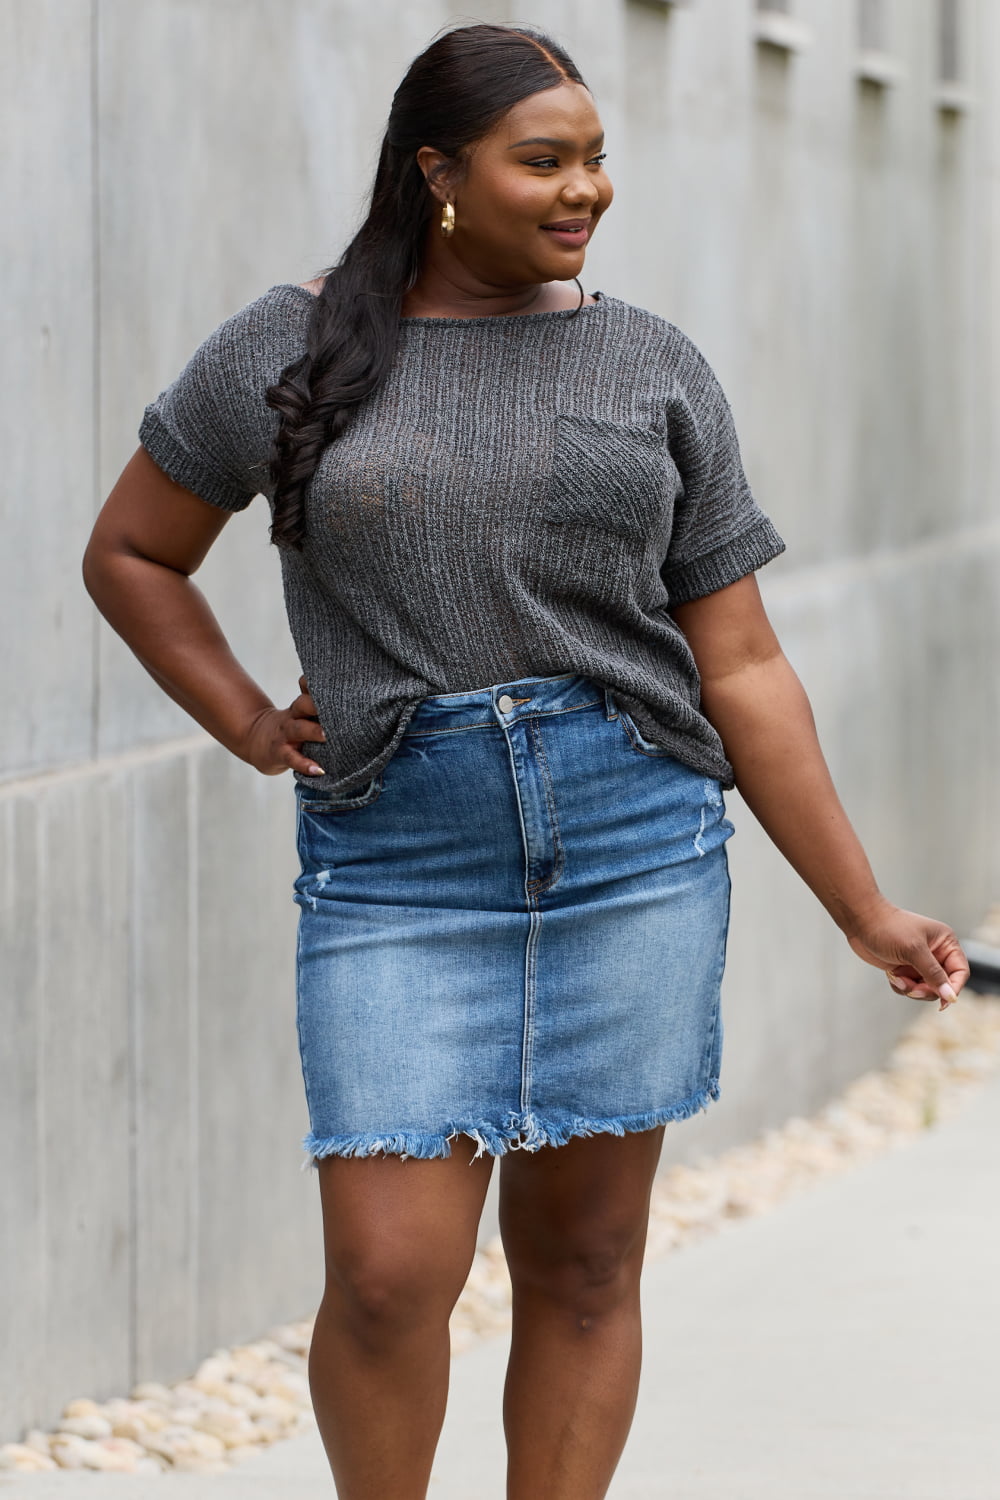 Chunky Knit Short Sleeve Top in Gray - Camis & Tops - Shirts & Tops - 6 - 2024